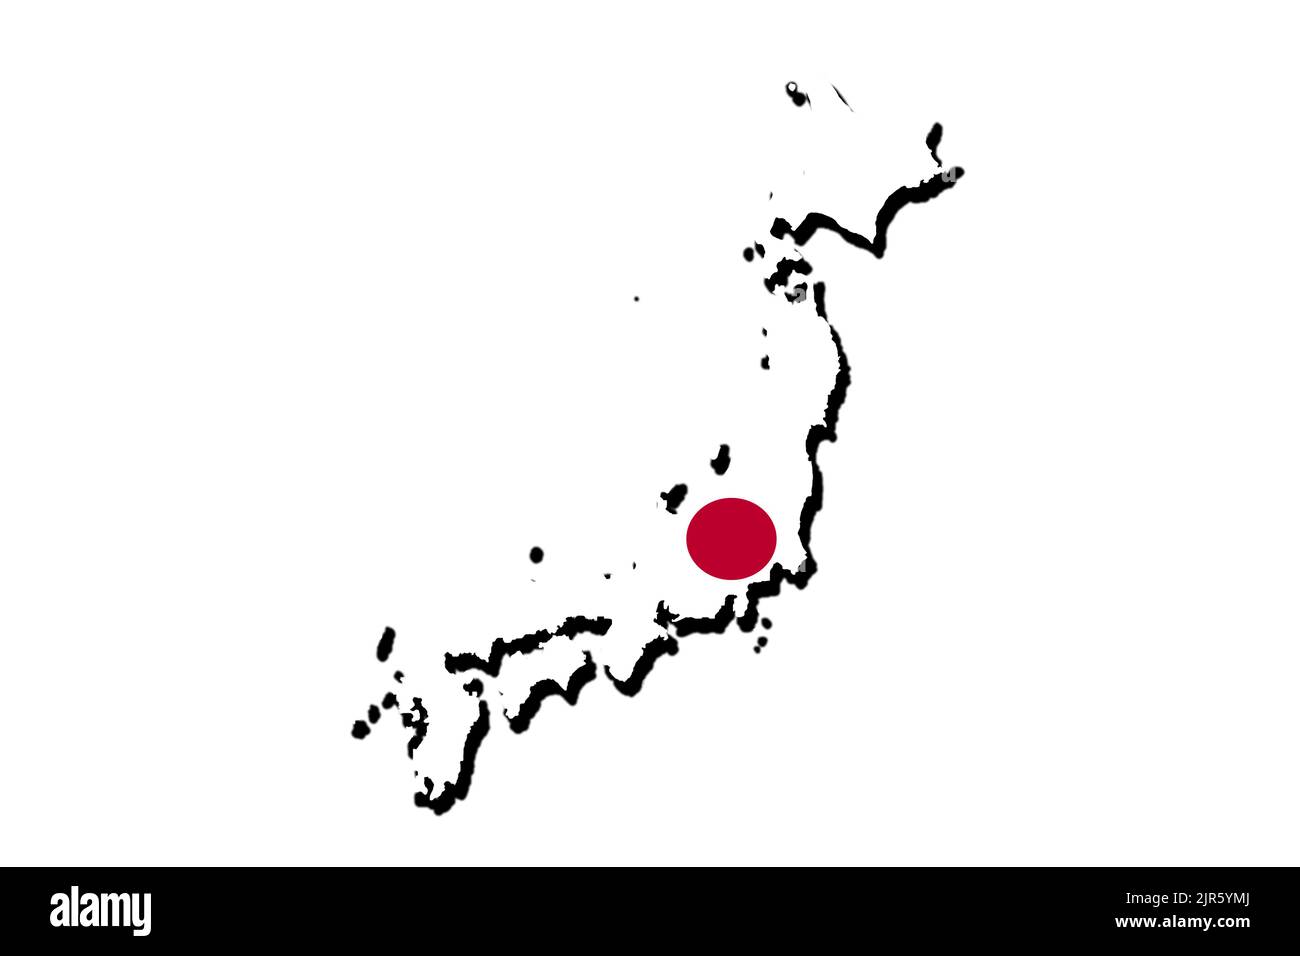 Silhouette of the map of Japon with its flag Stock Photo